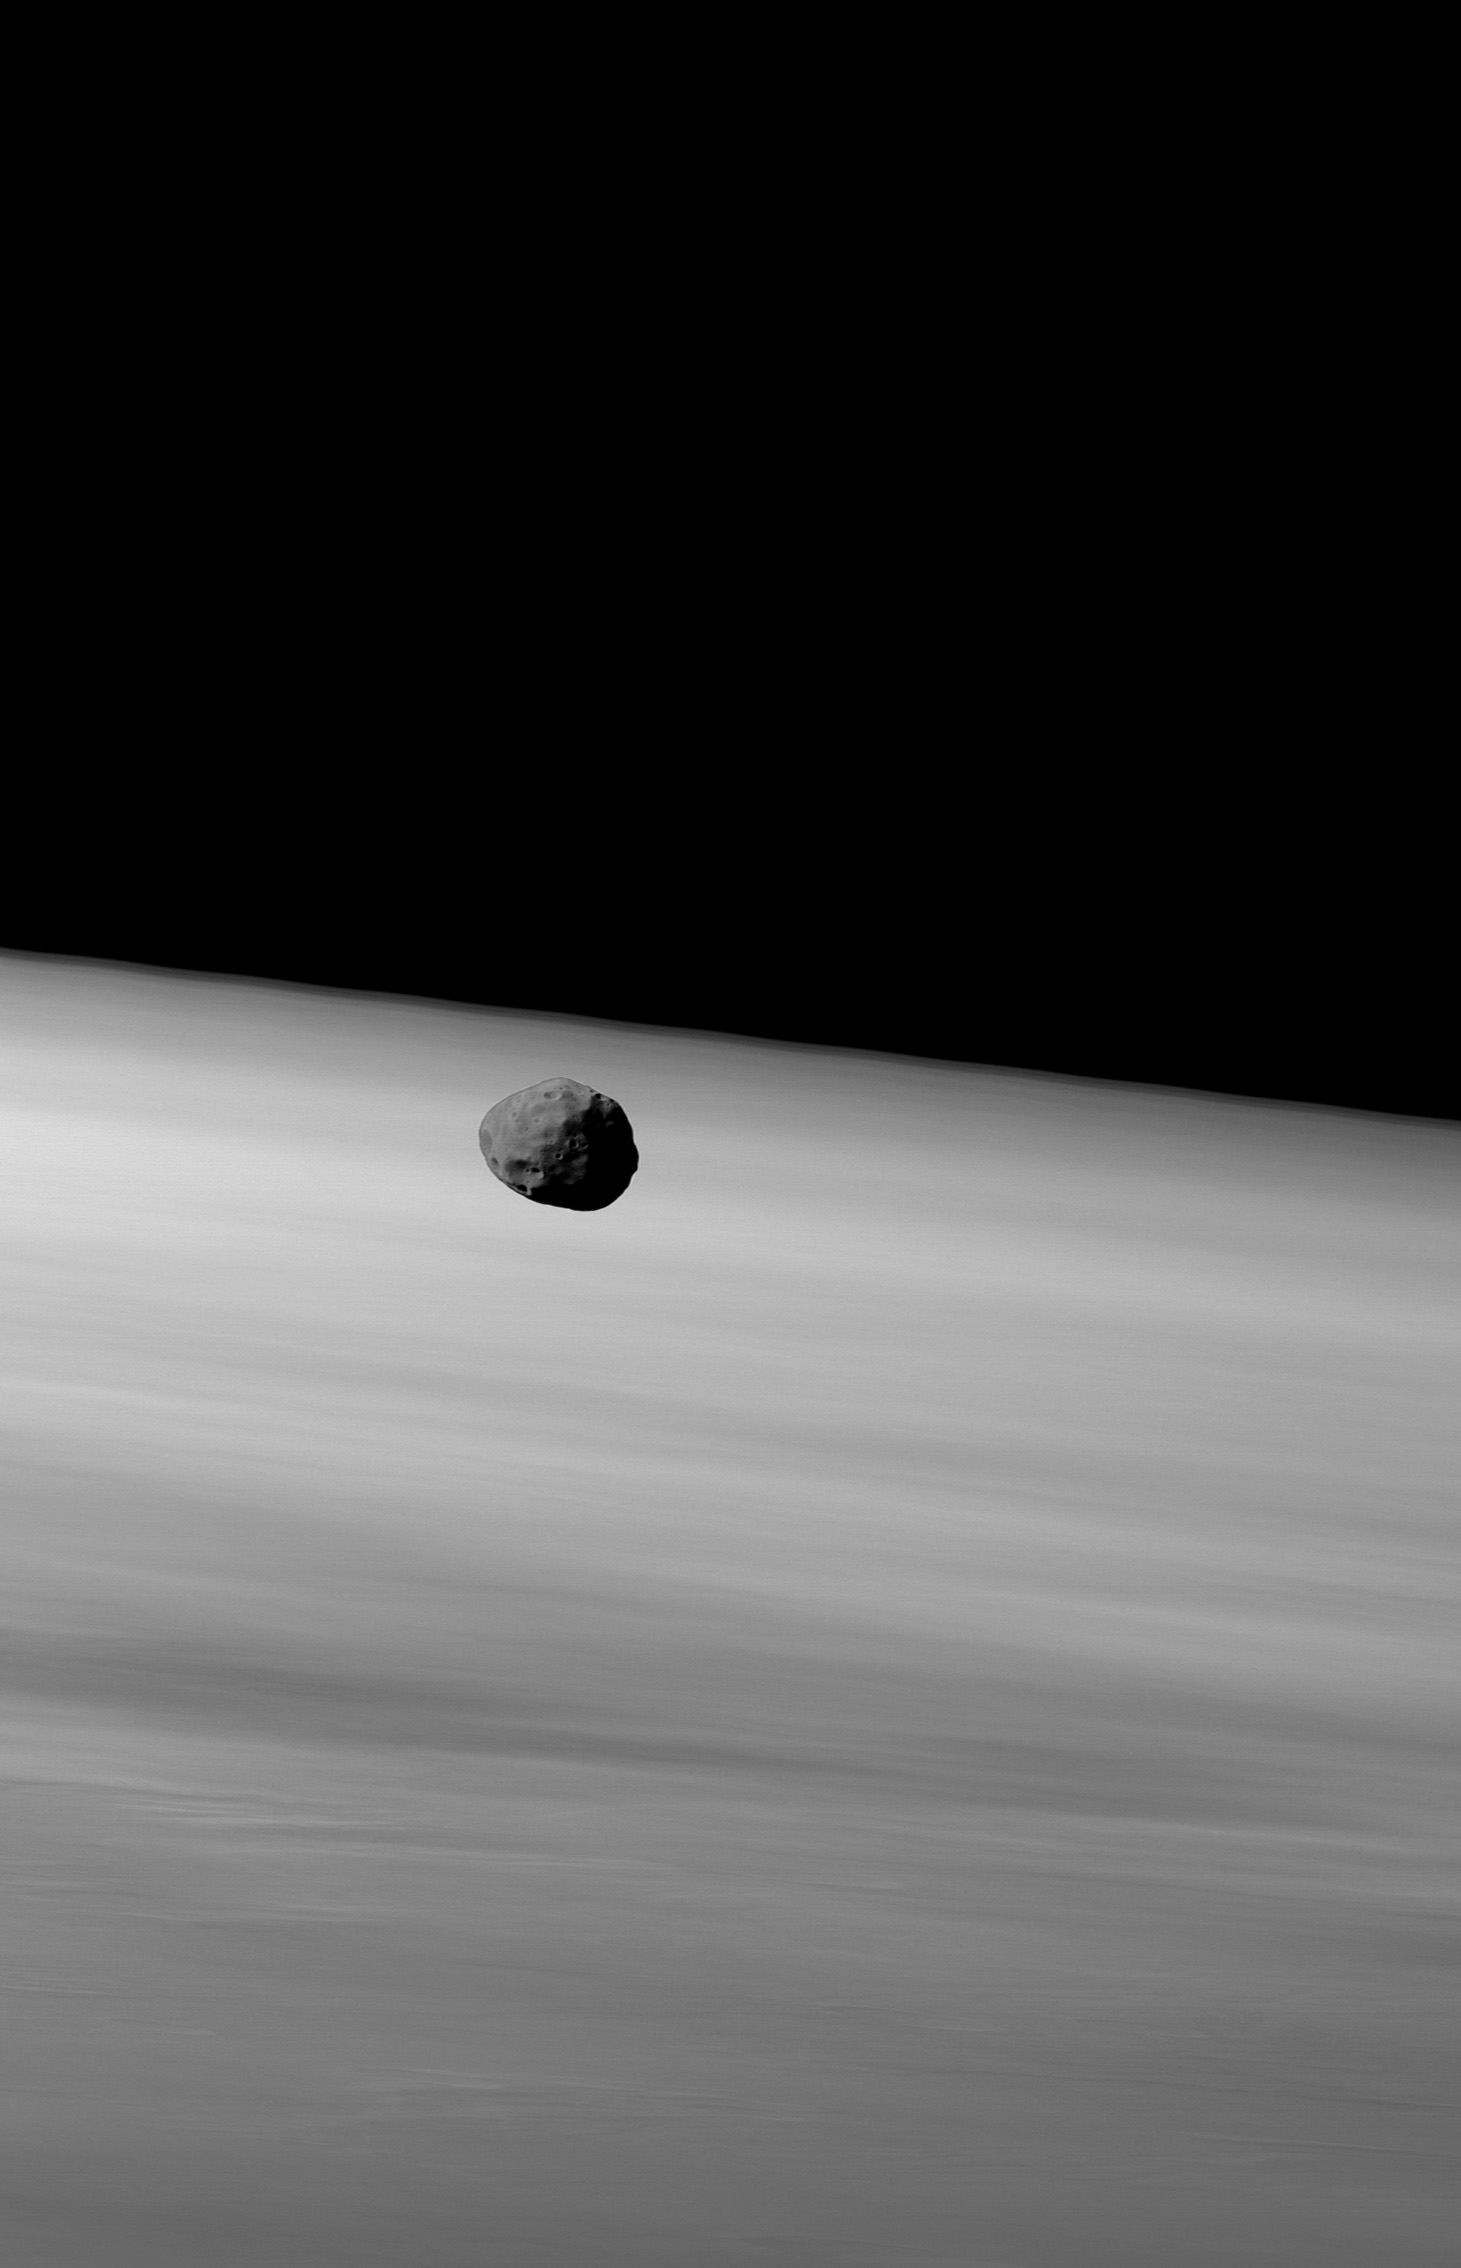 An image of Phobos by the High-Resolution Stereo Camera on board ESA's Mars Express spacecraft on January 22, 2007.